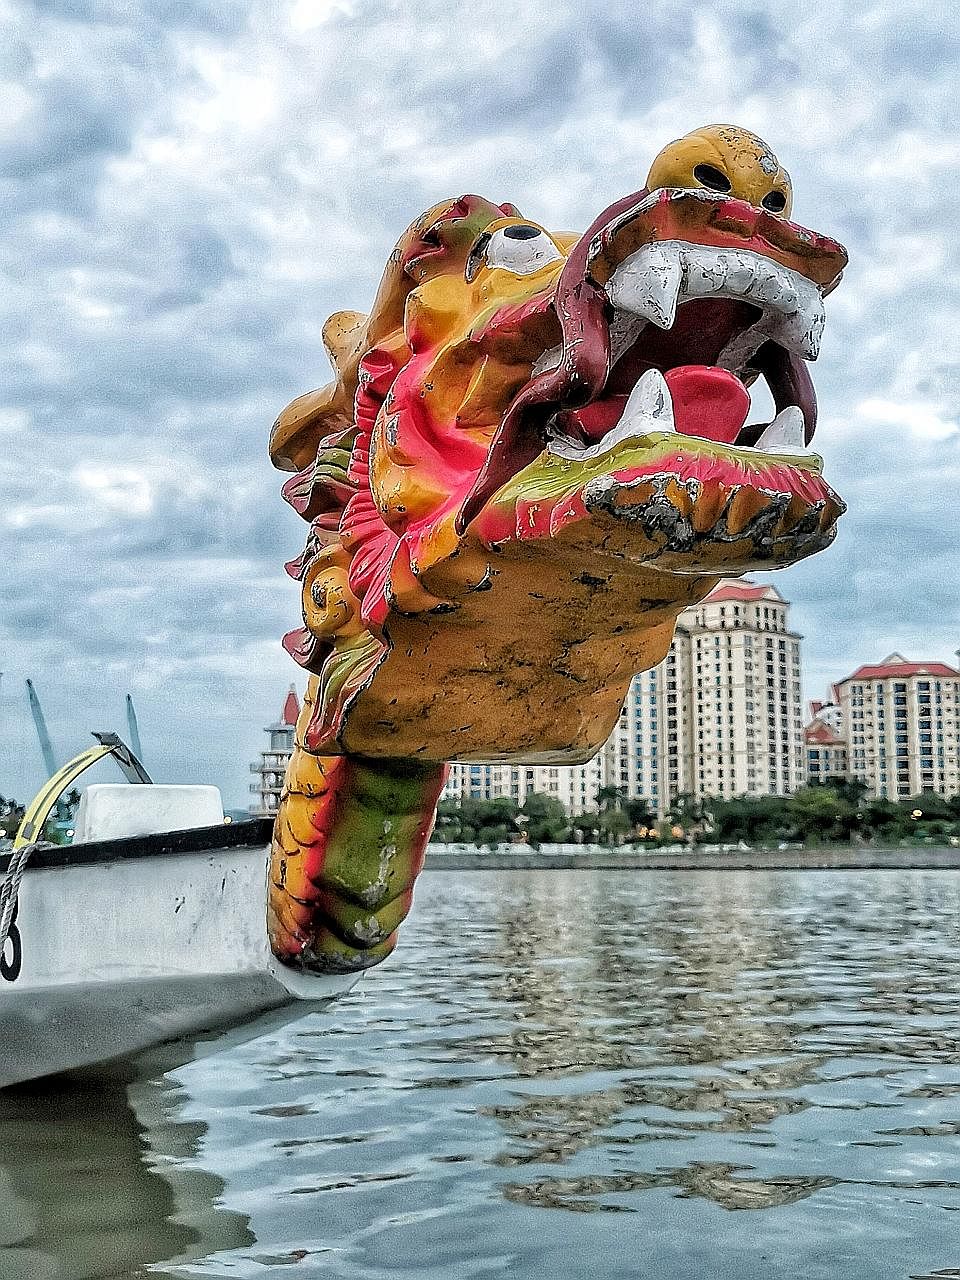 A dragon boat at the Singapore River. For a second year, Covid-19 safe management measures have put on hold the dragon boat races that drew over 3,000 participants and supporters a year.